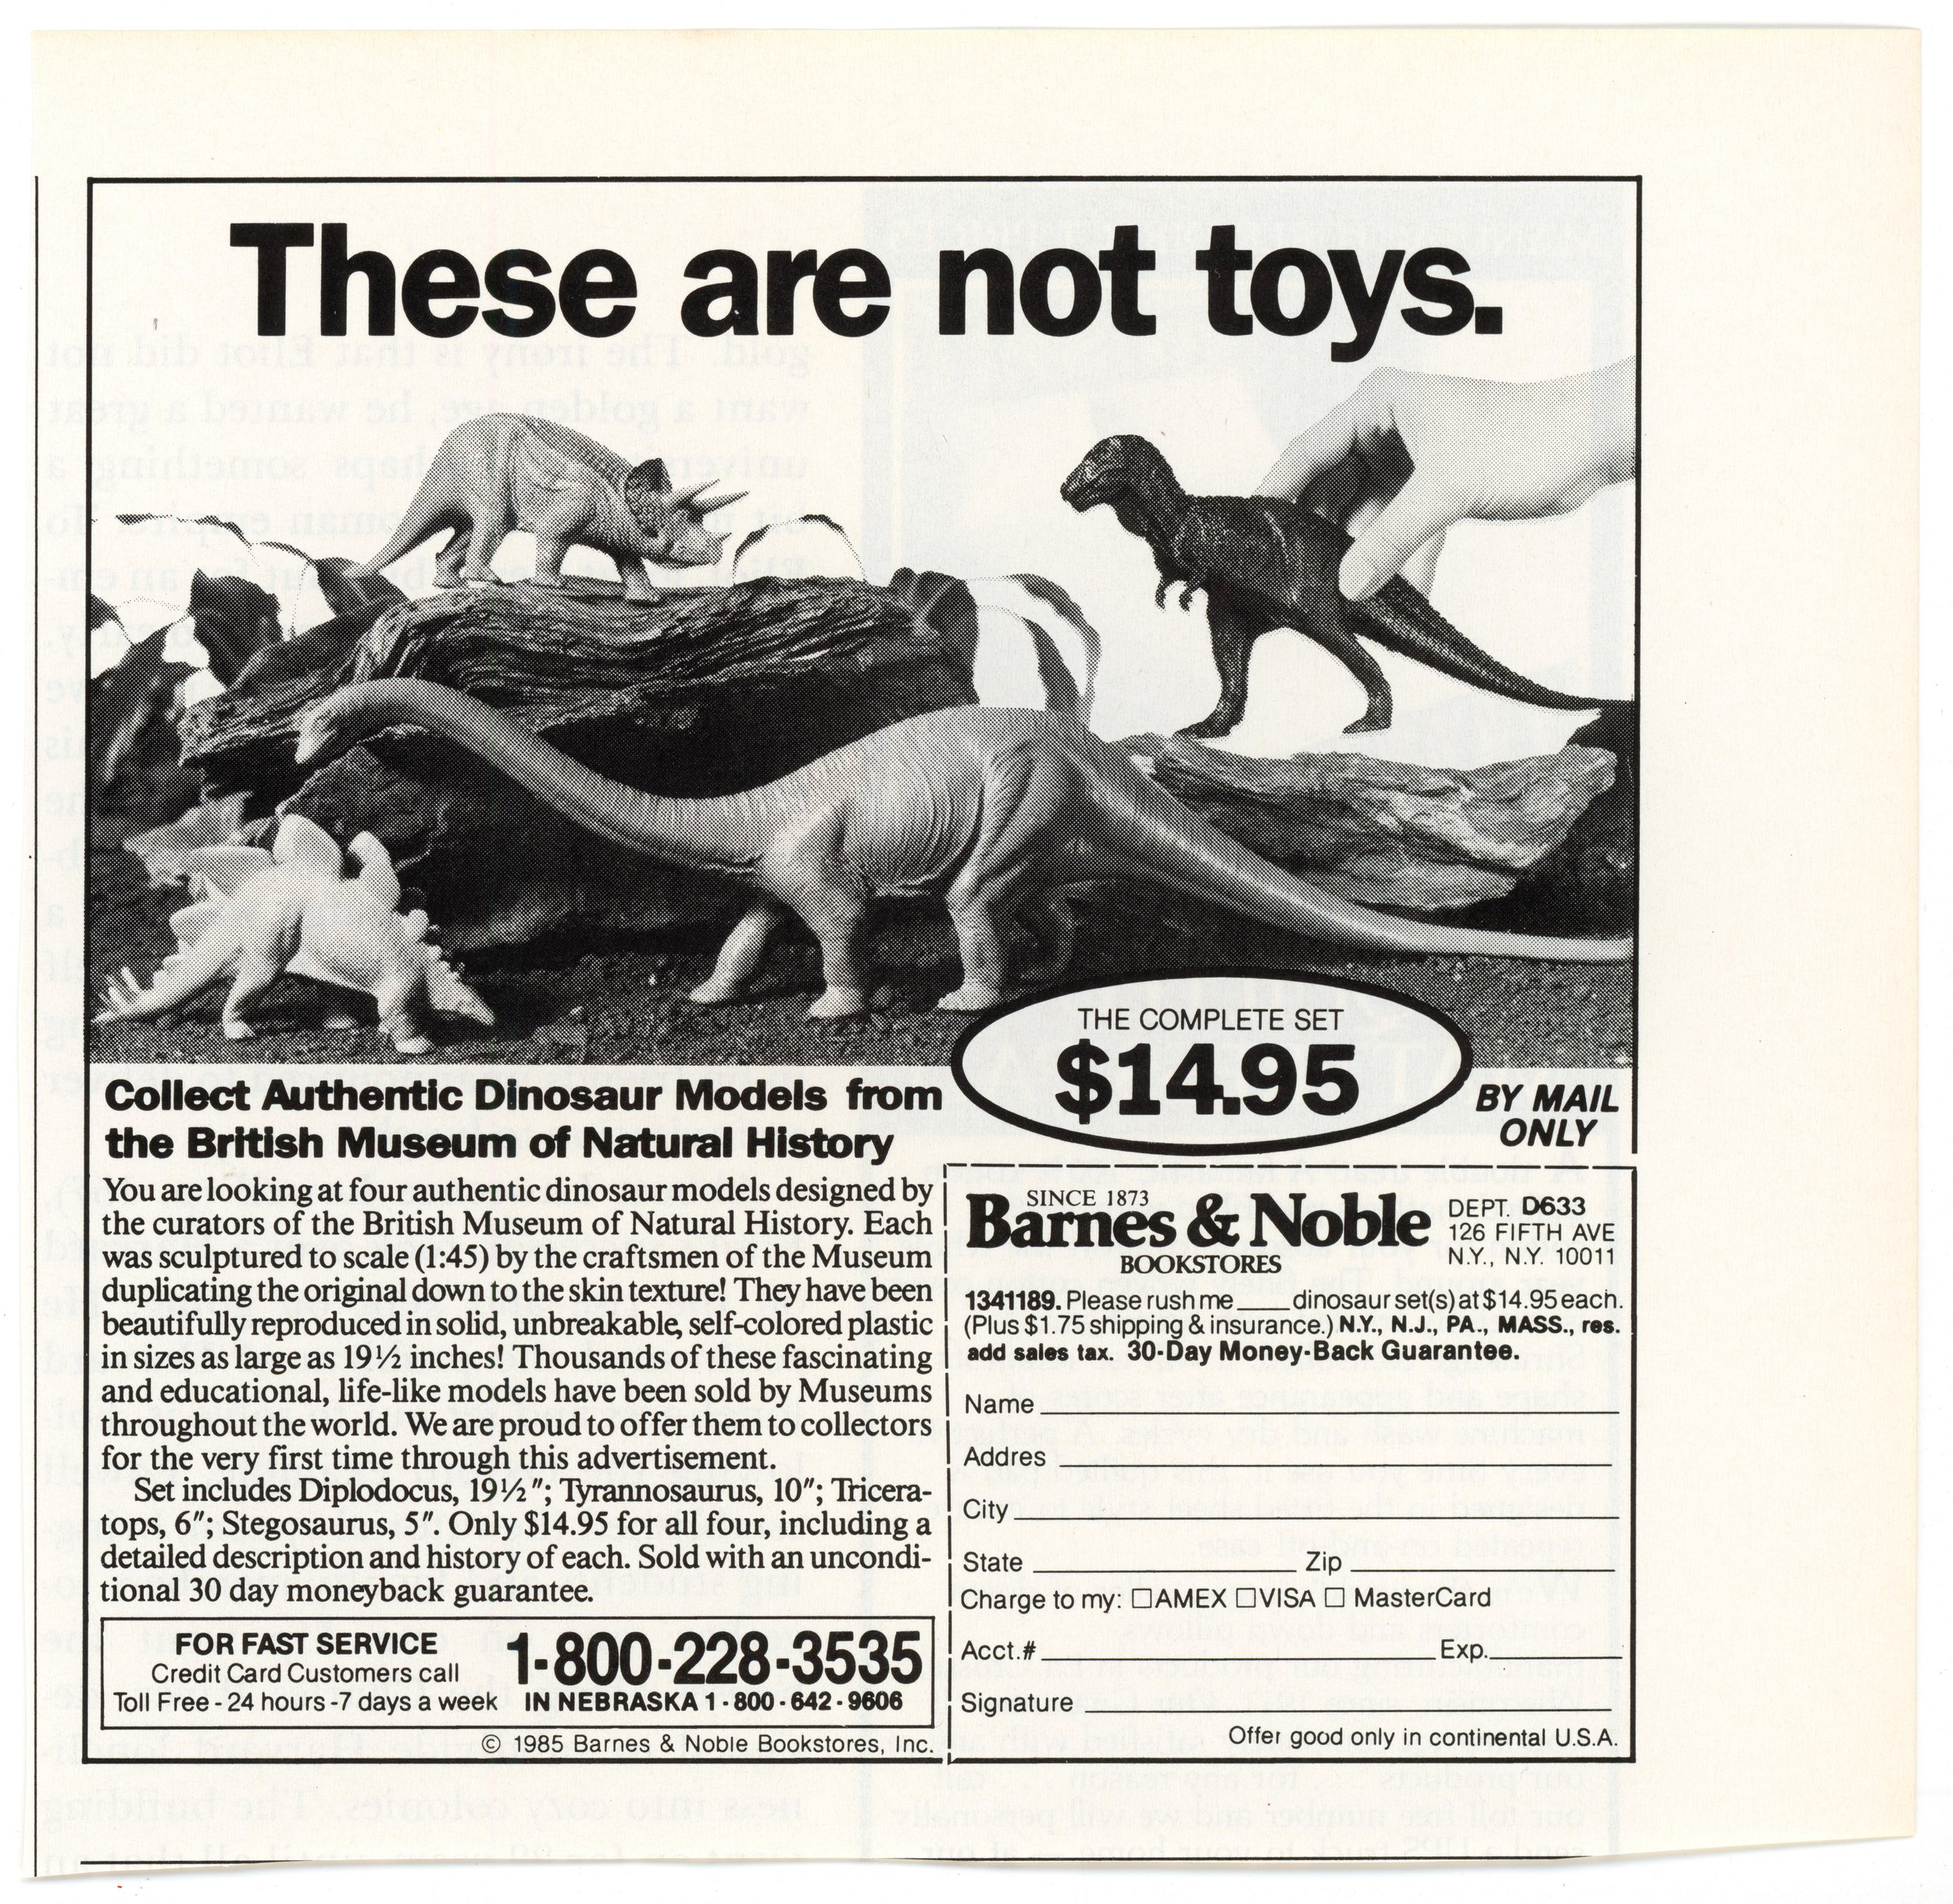 These Are Not Toys Original Ad.jpg